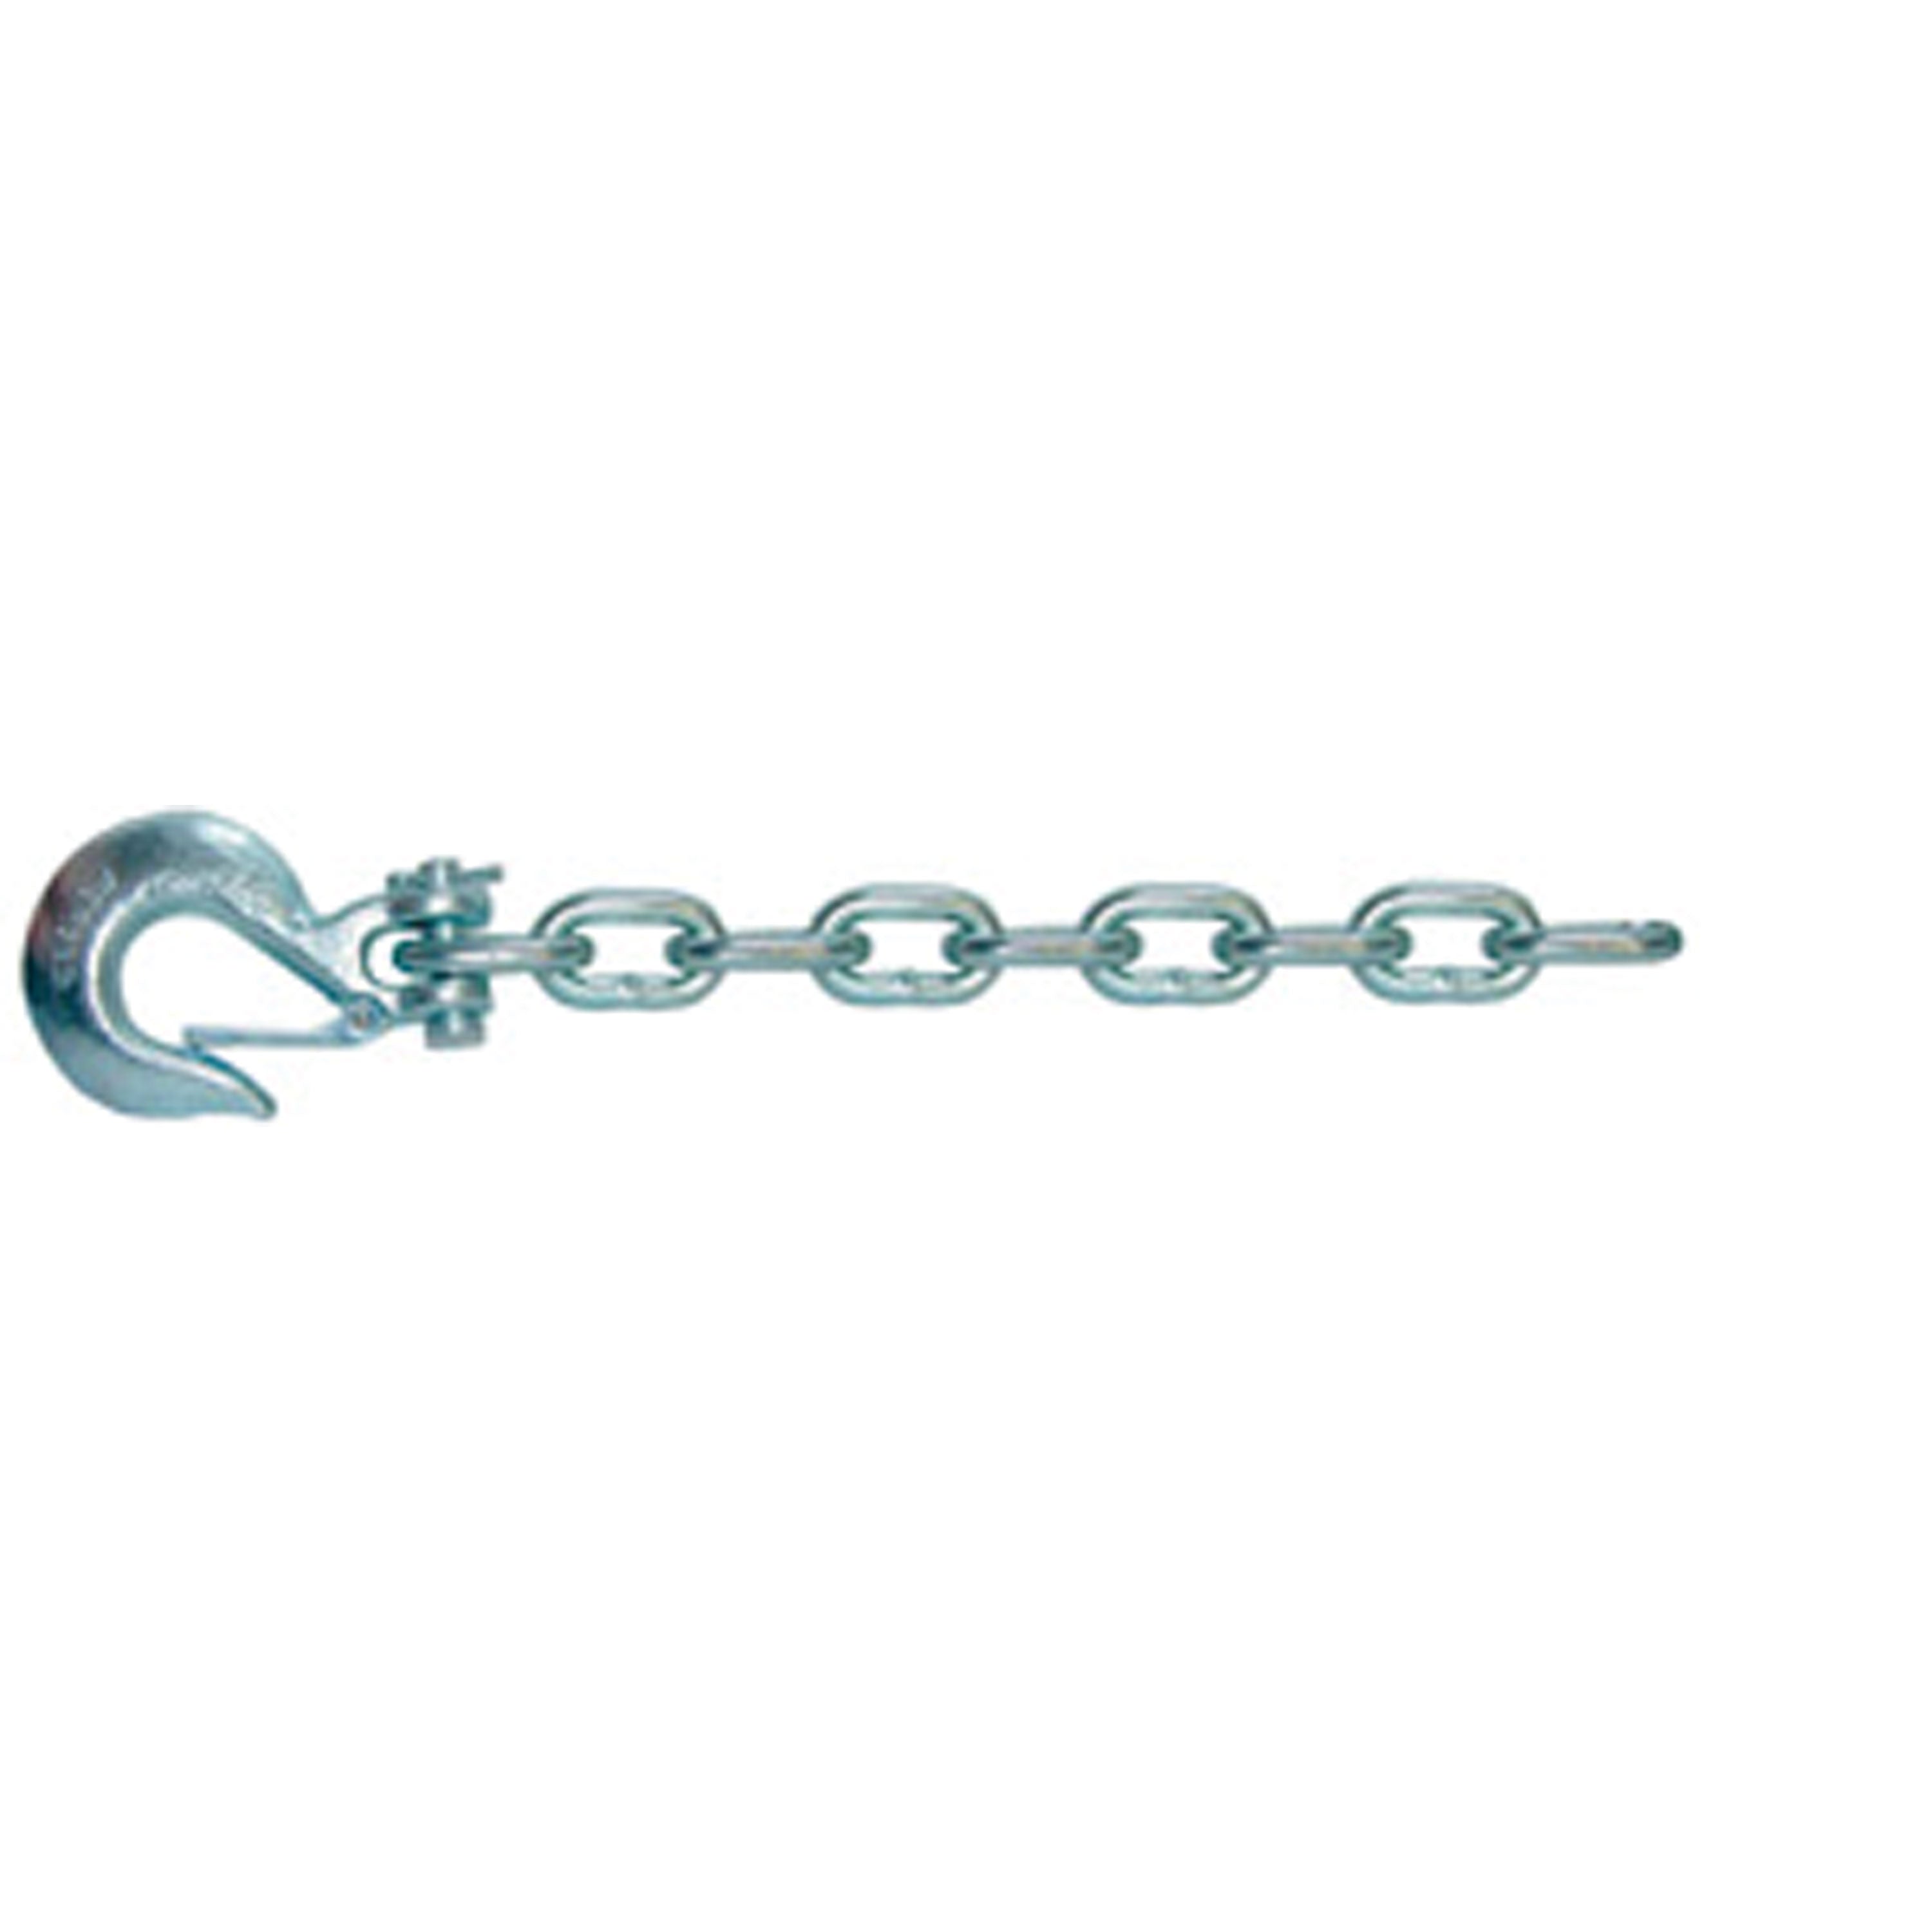 C.R. Brophy HL45 Heavy Duty Safety Chain with Hook Grade 70 - 3/8" x 37"